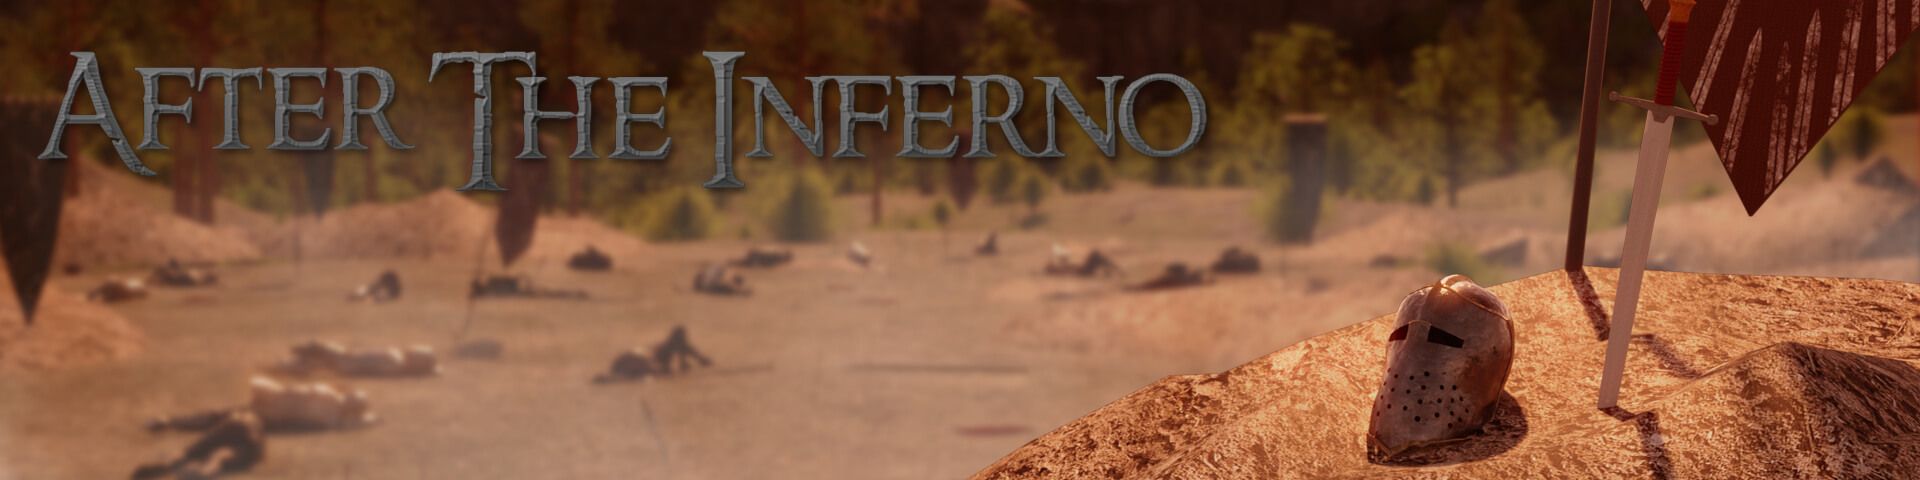 After the Inferno [v0.6]